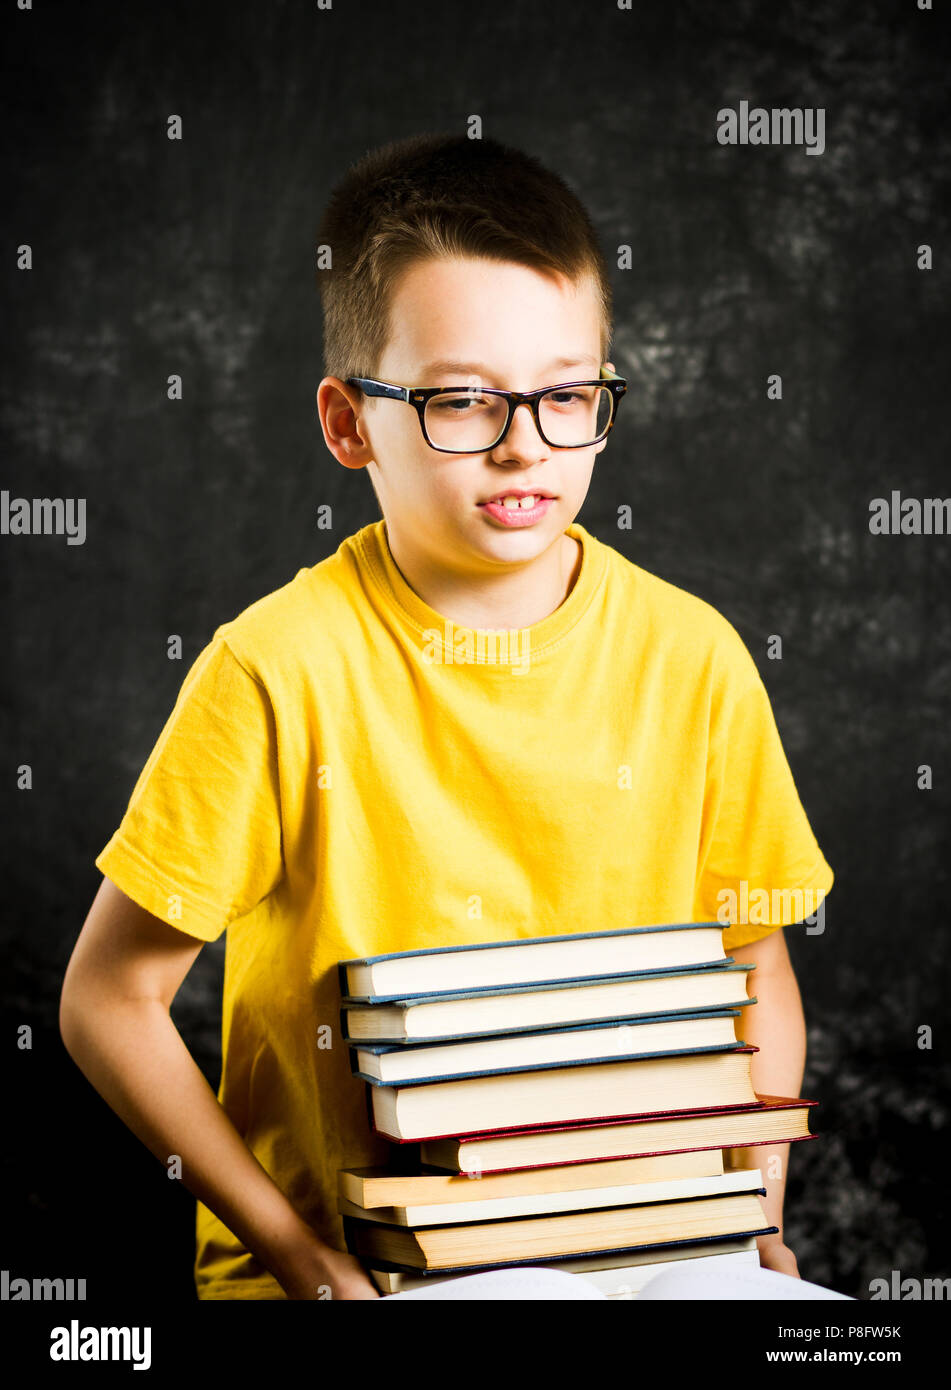 Schoolboy lifting a big and heavy pile of books Stock Photo